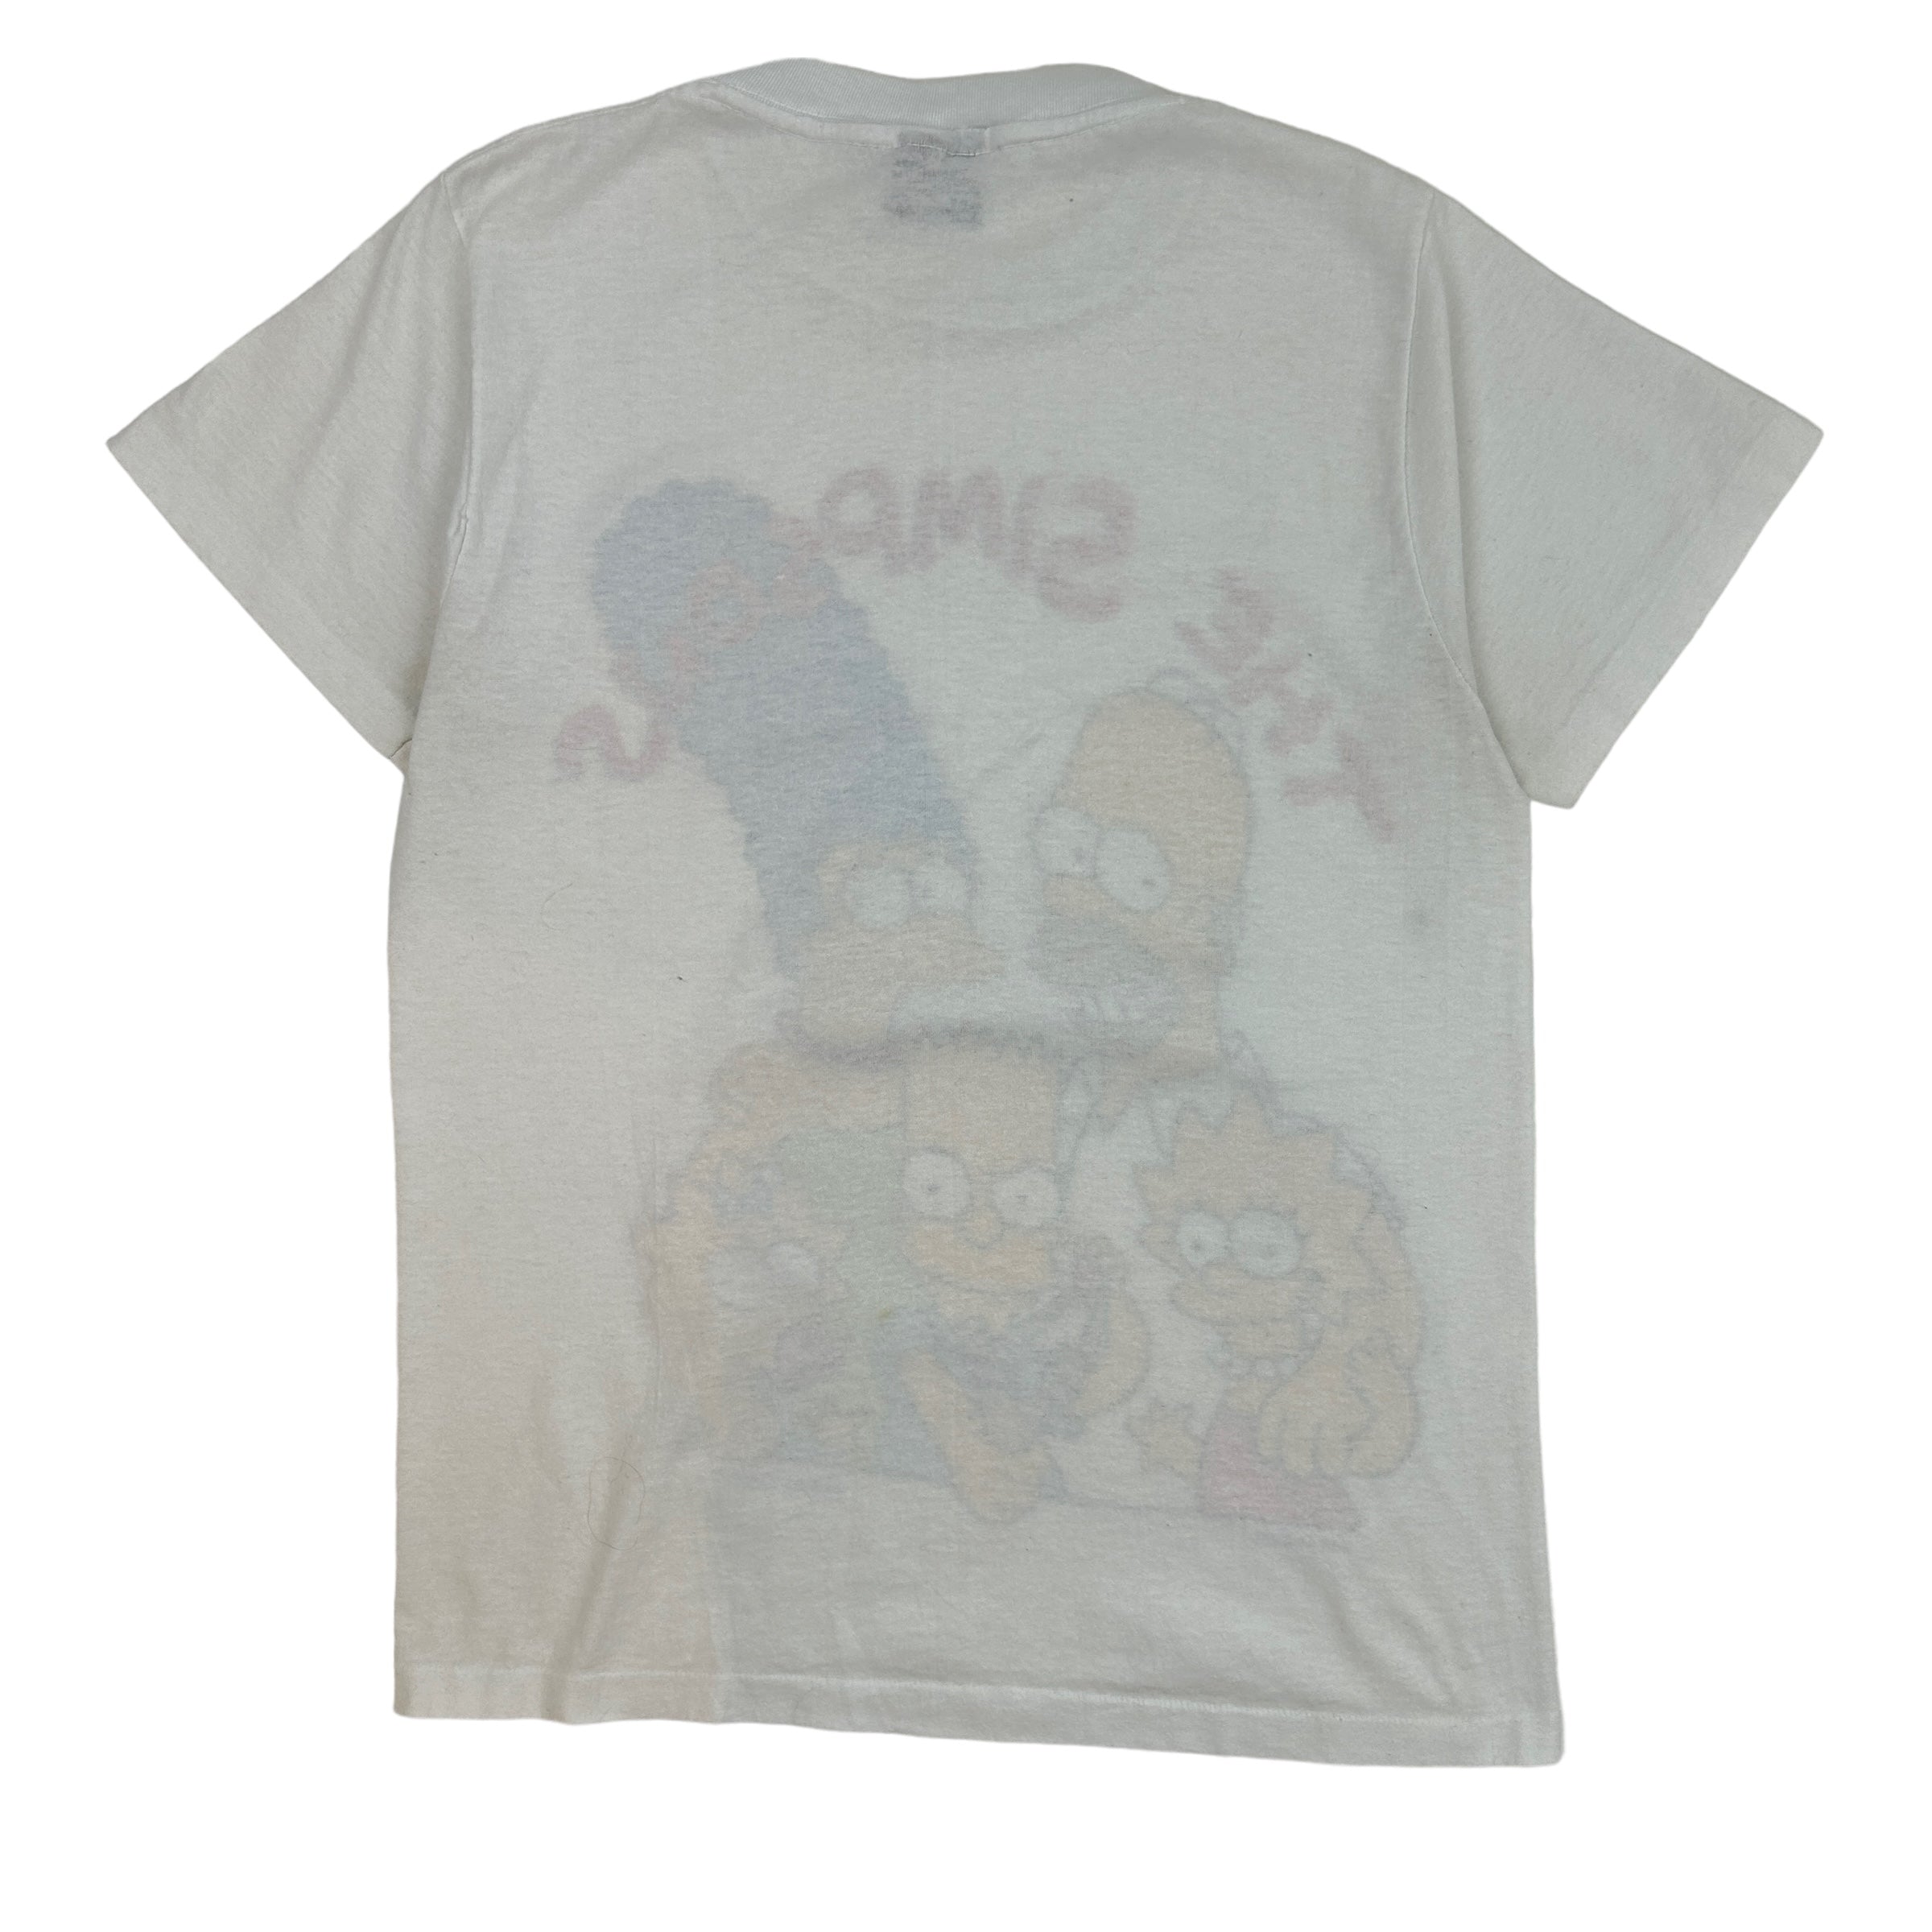 1990 The Simpsons Family T-Shirt White